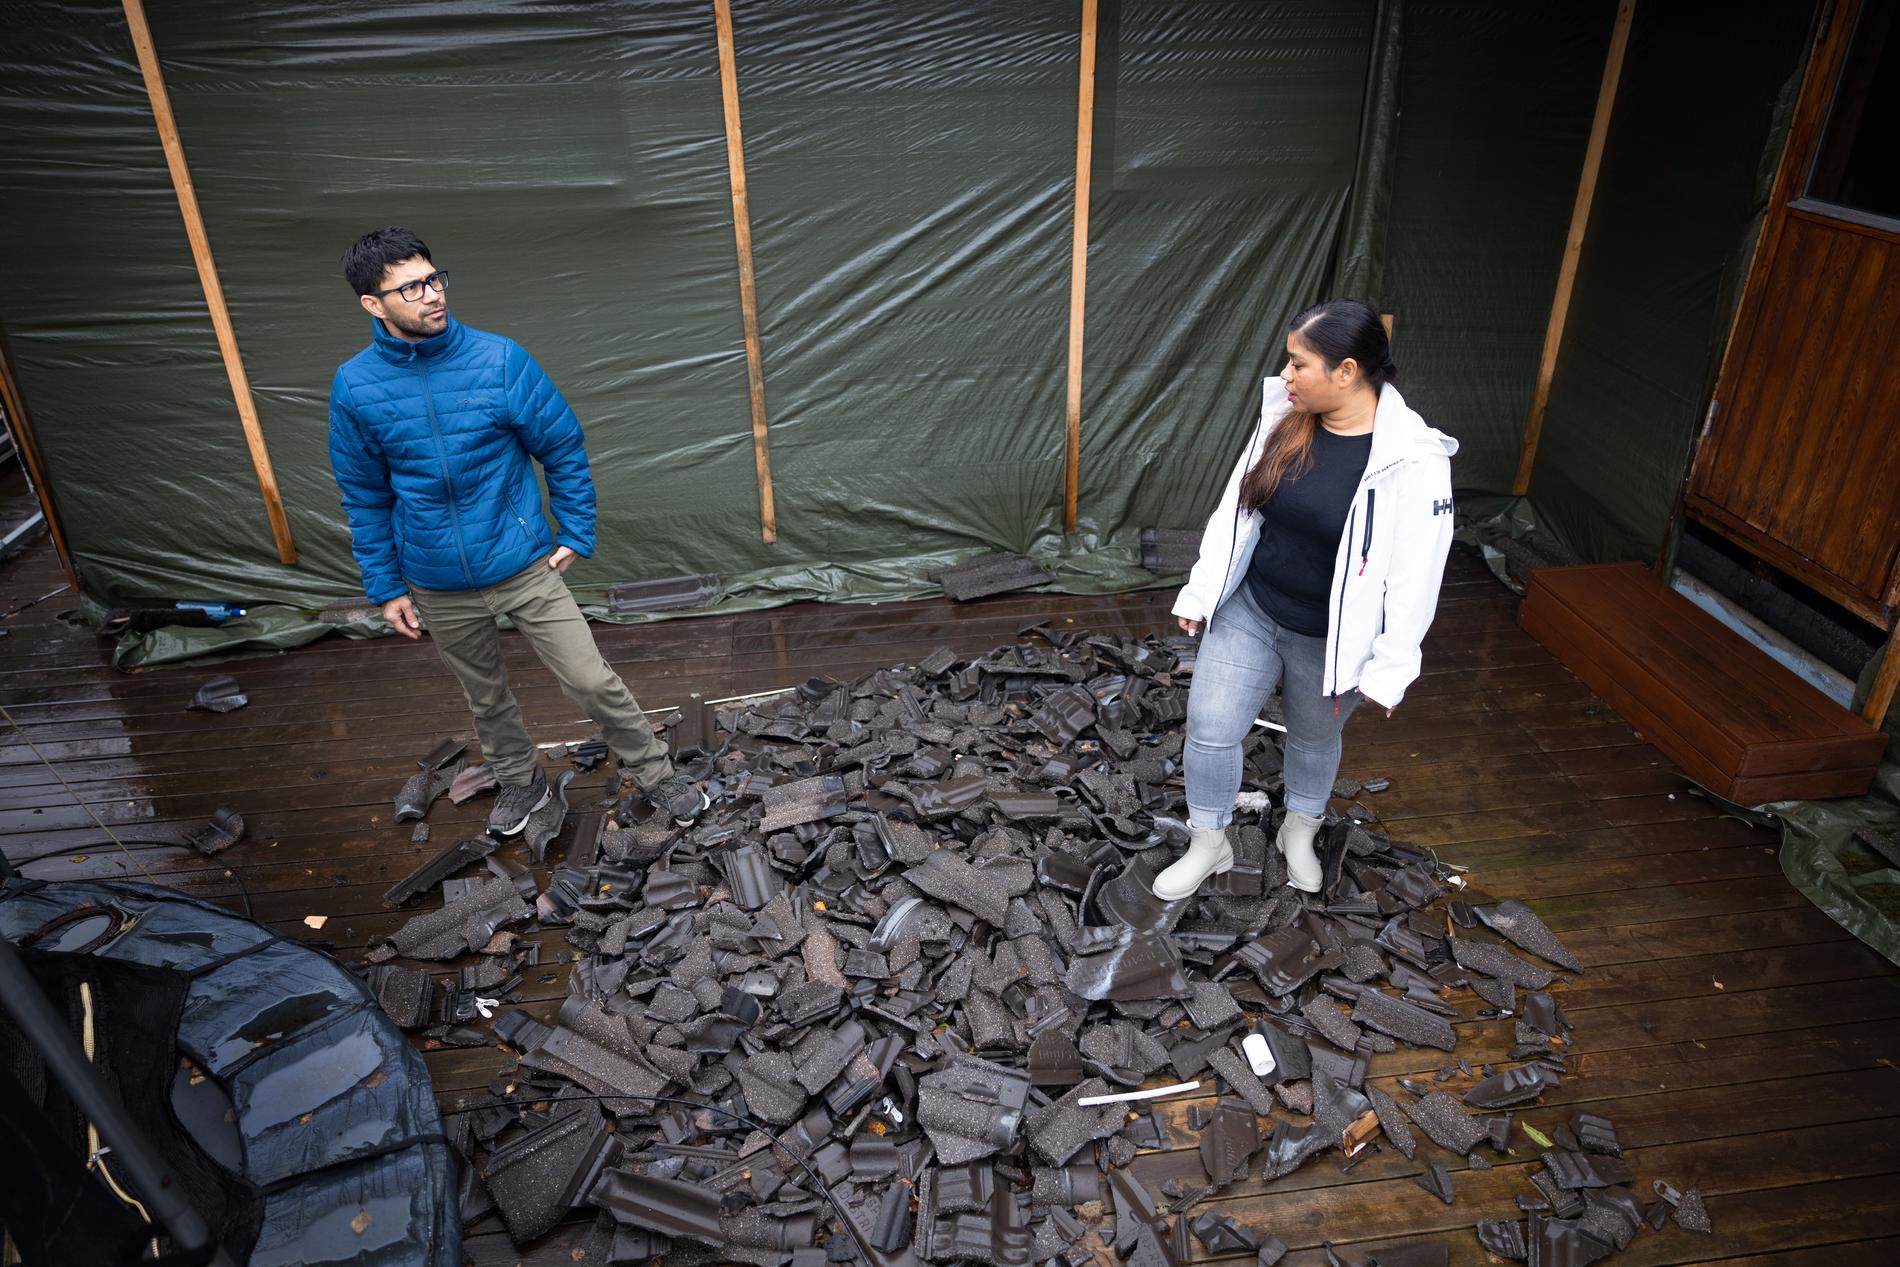 Mahindra Singh and his family fled the fire when the family’s home in Bergen was set on fire.